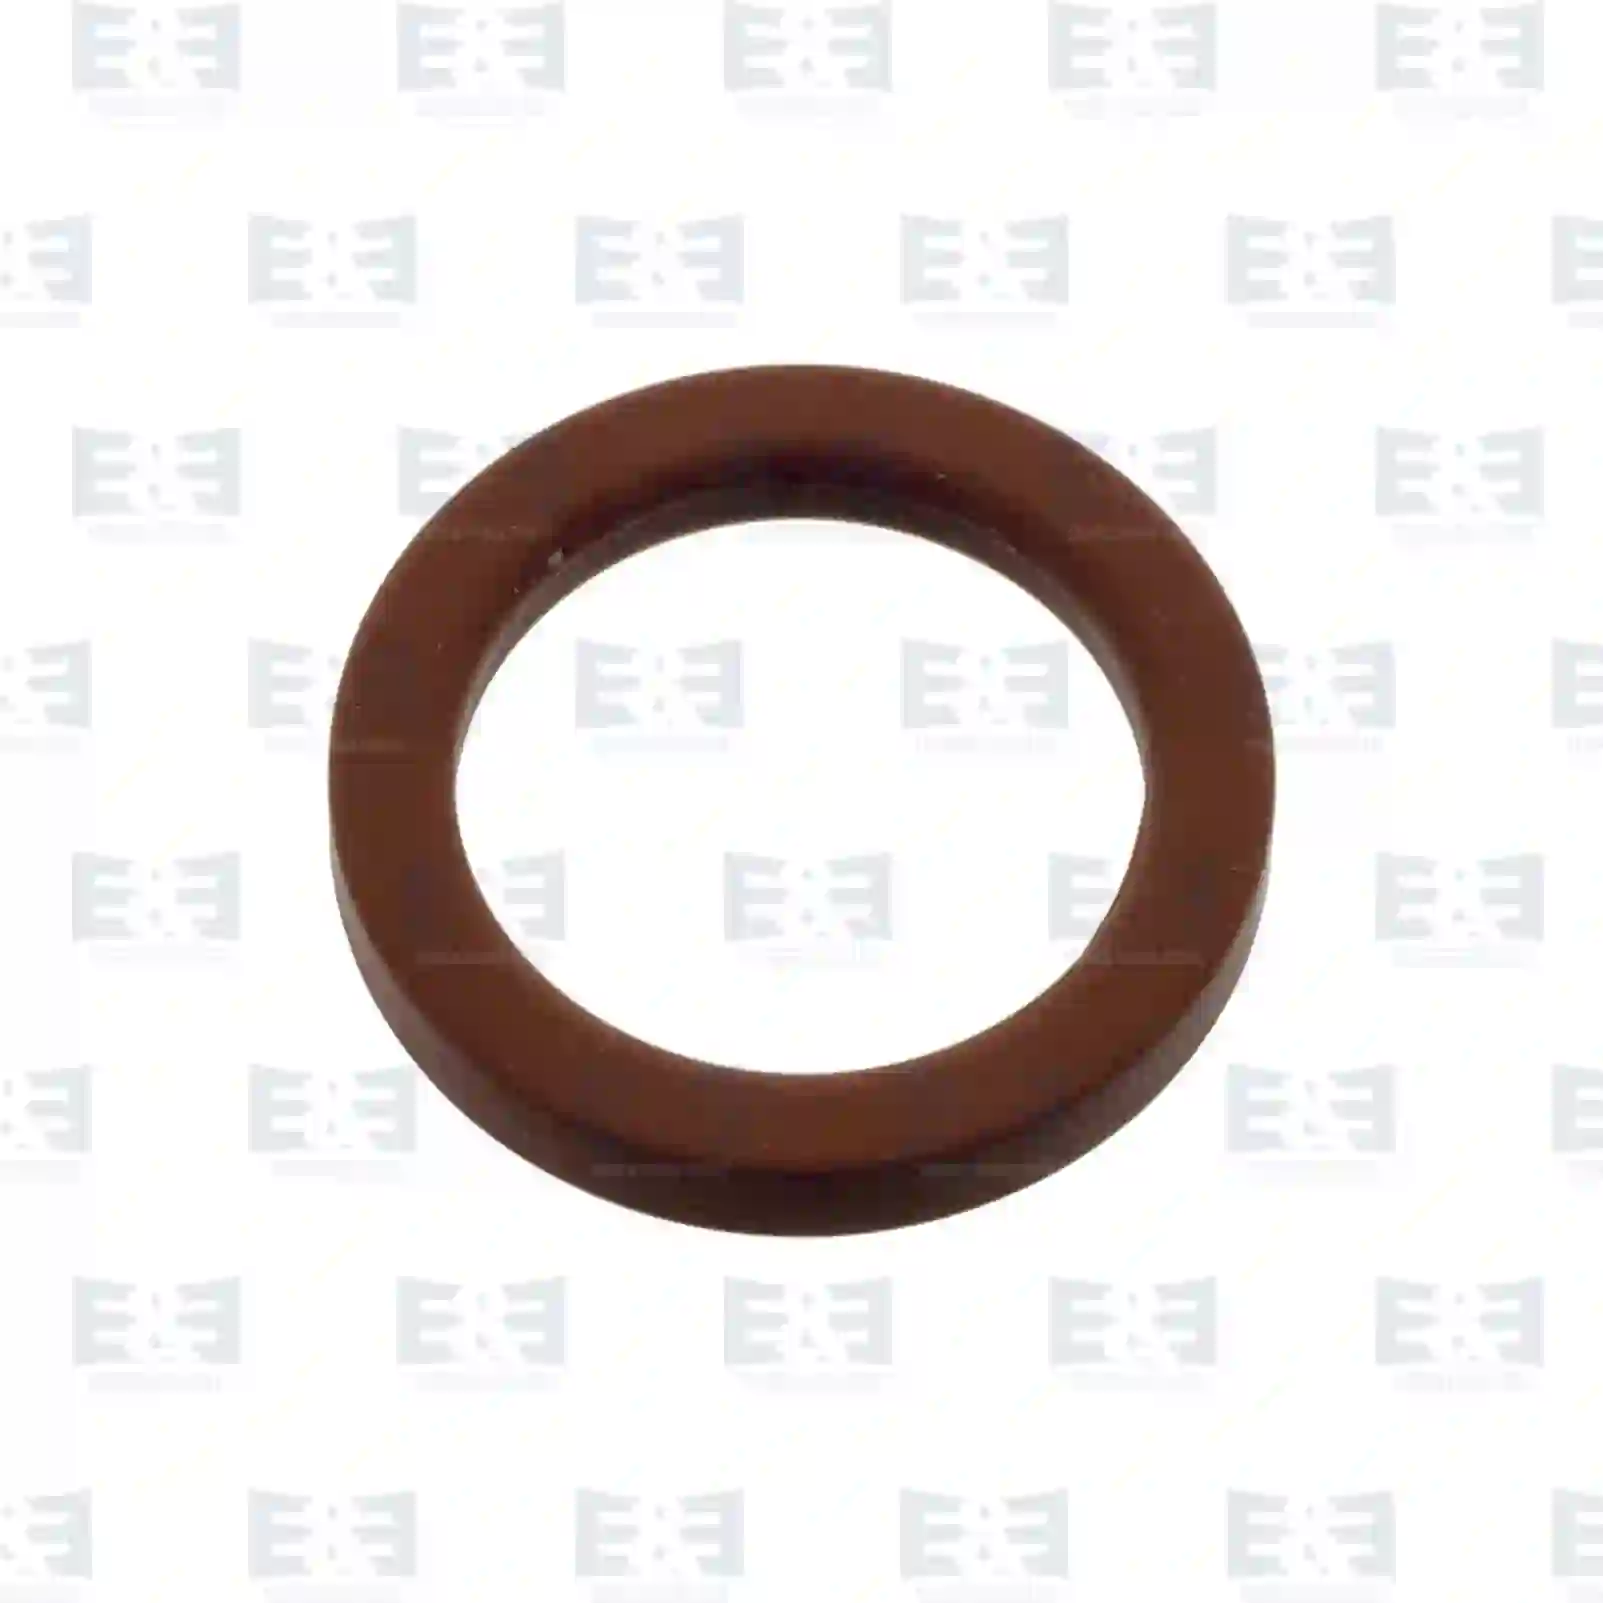 Seal ring, injection sleeve, 2E2286839, 466405, ZG10513-0008, ||  2E2286839 E&E Truck Spare Parts | Truck Spare Parts, Auotomotive Spare Parts Seal ring, injection sleeve, 2E2286839, 466405, ZG10513-0008, ||  2E2286839 E&E Truck Spare Parts | Truck Spare Parts, Auotomotive Spare Parts